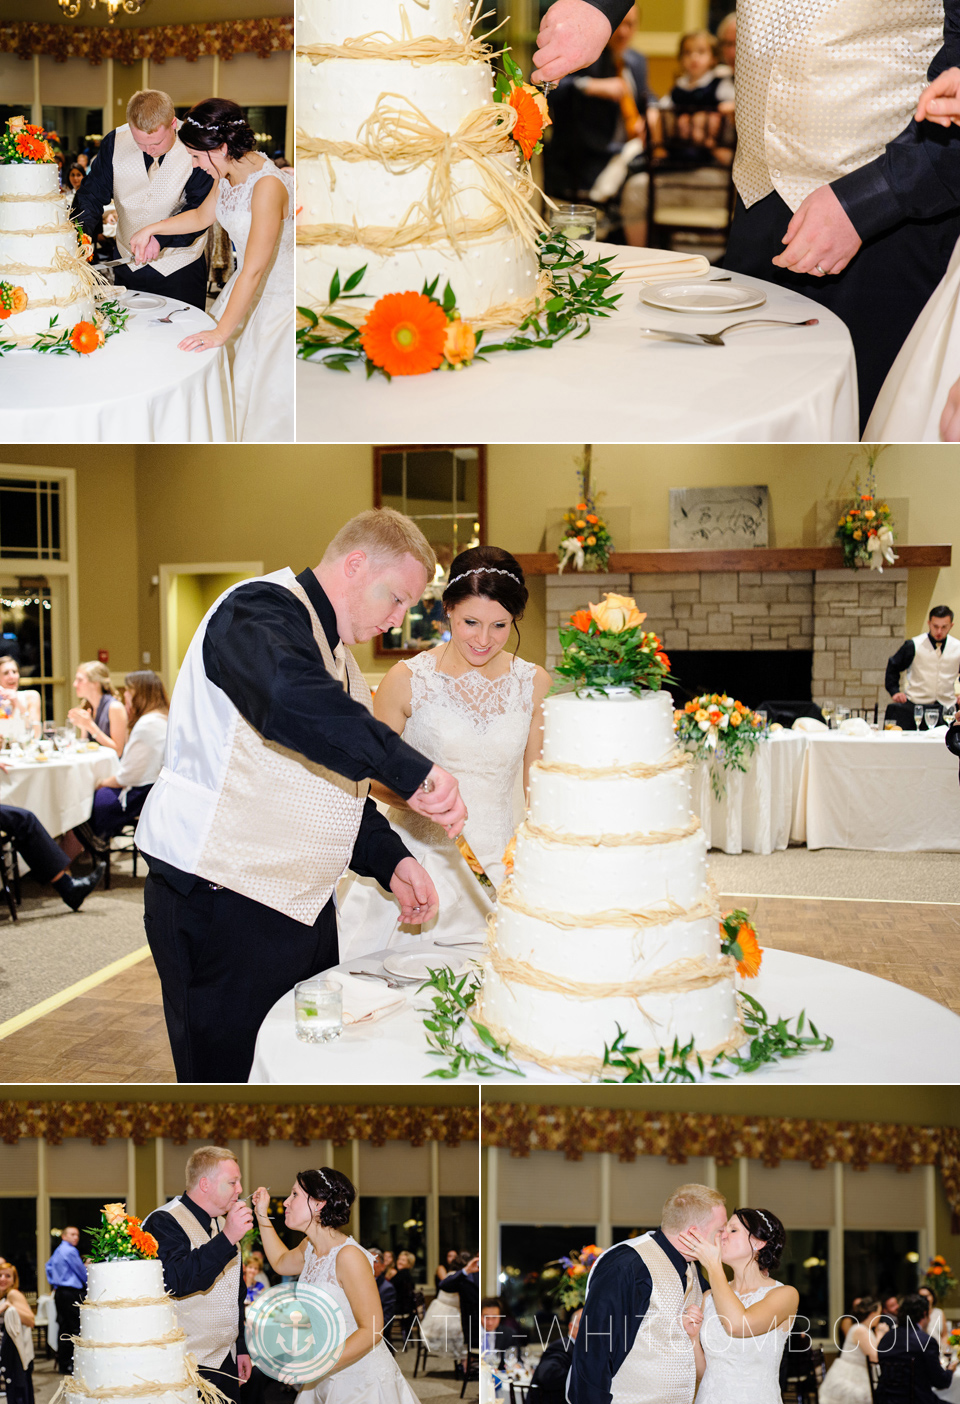 Bride & Groom cutting their cake at their wedding reception at South Bend Country Club